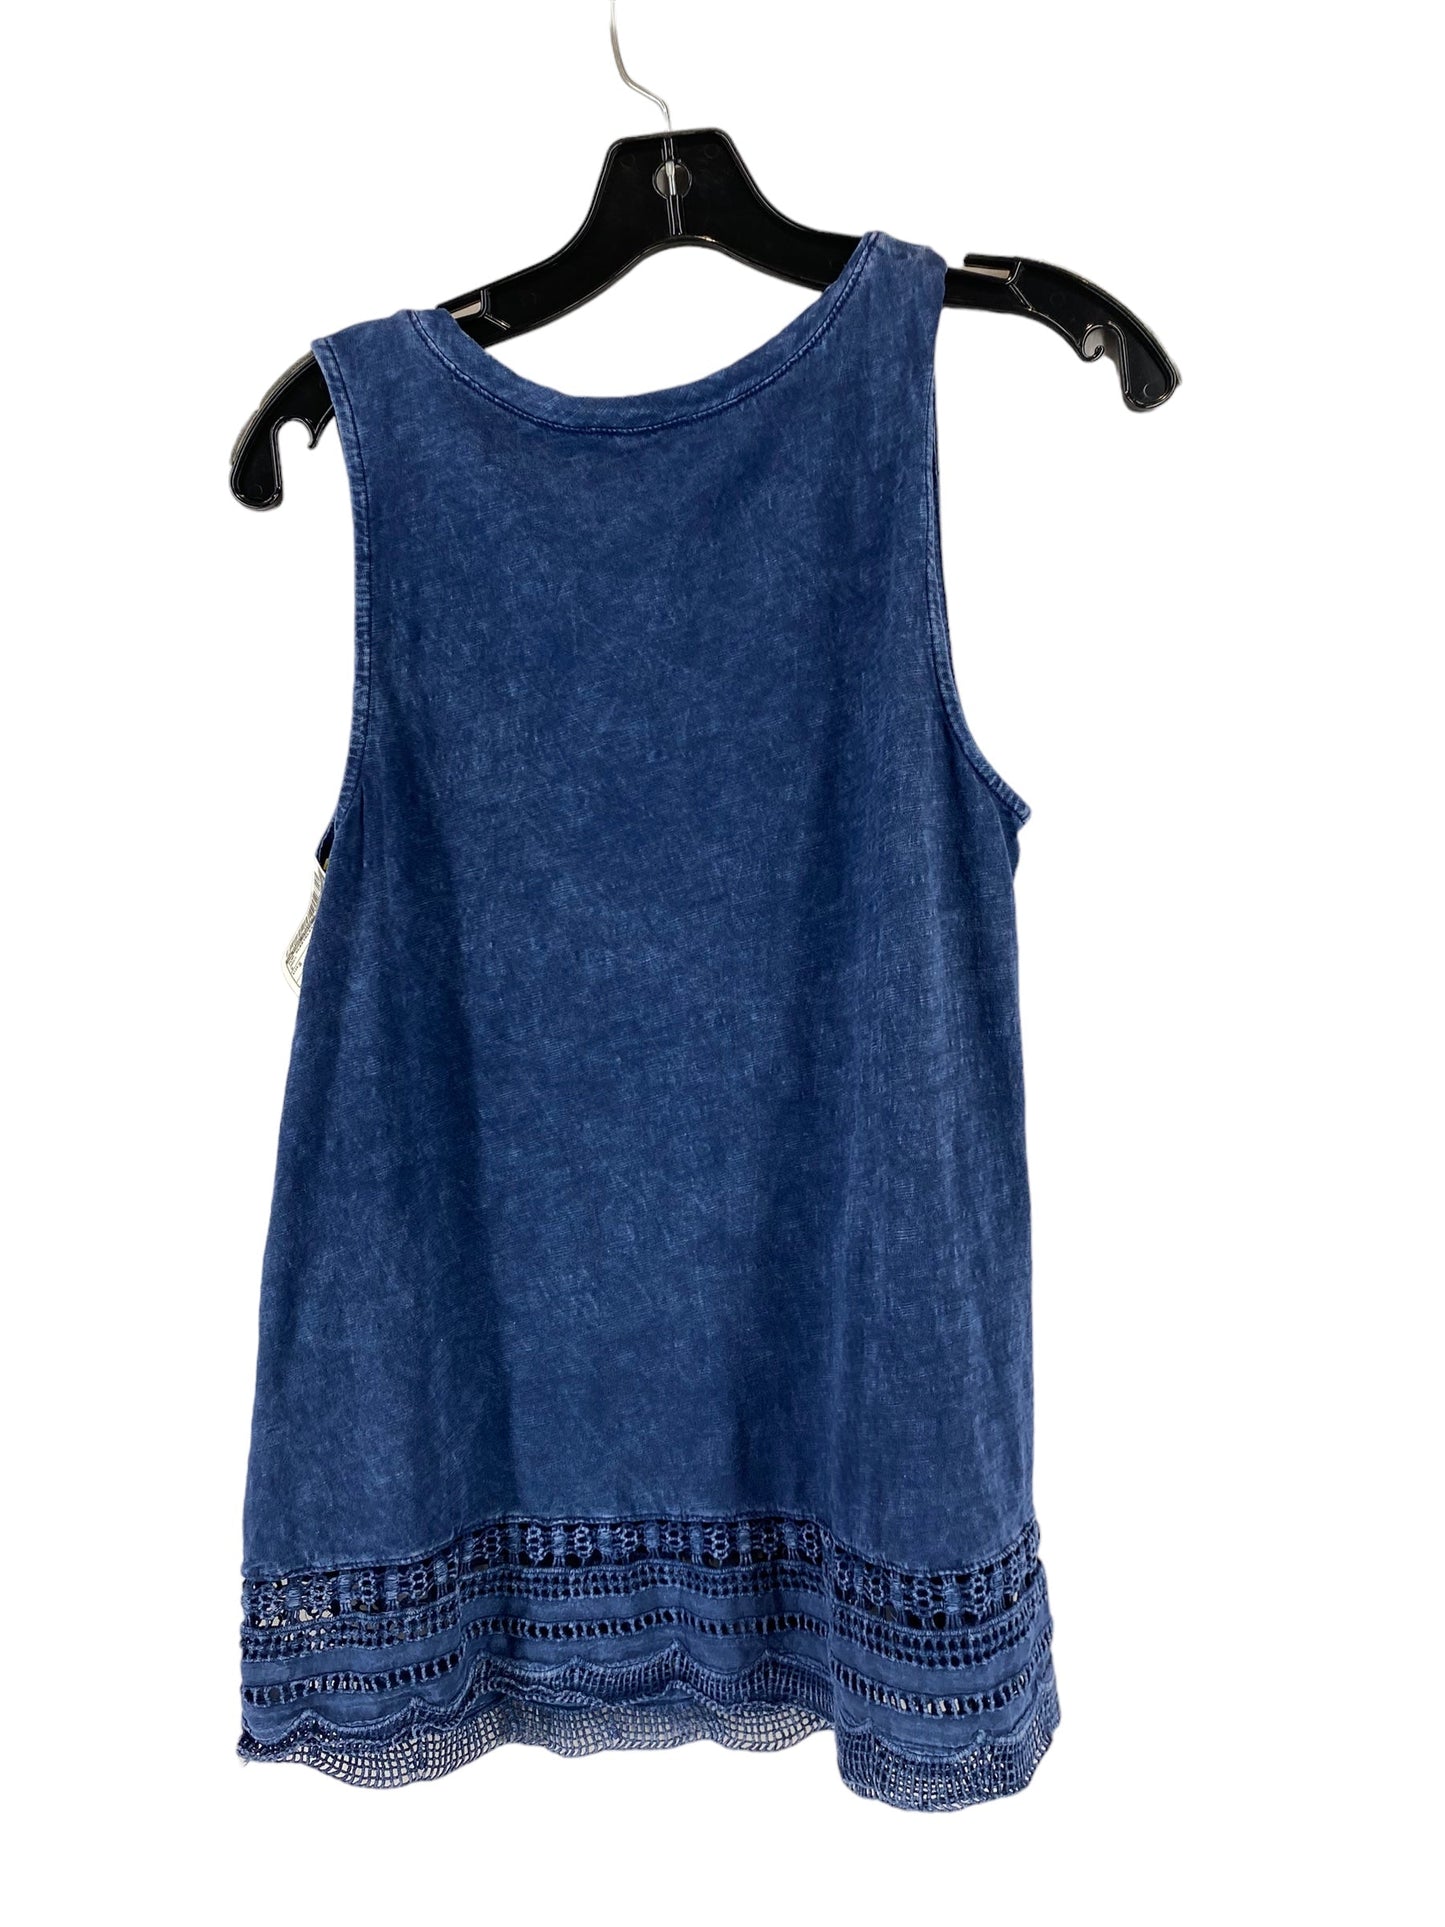 Navy Top Sleeveless Altard State, Size S